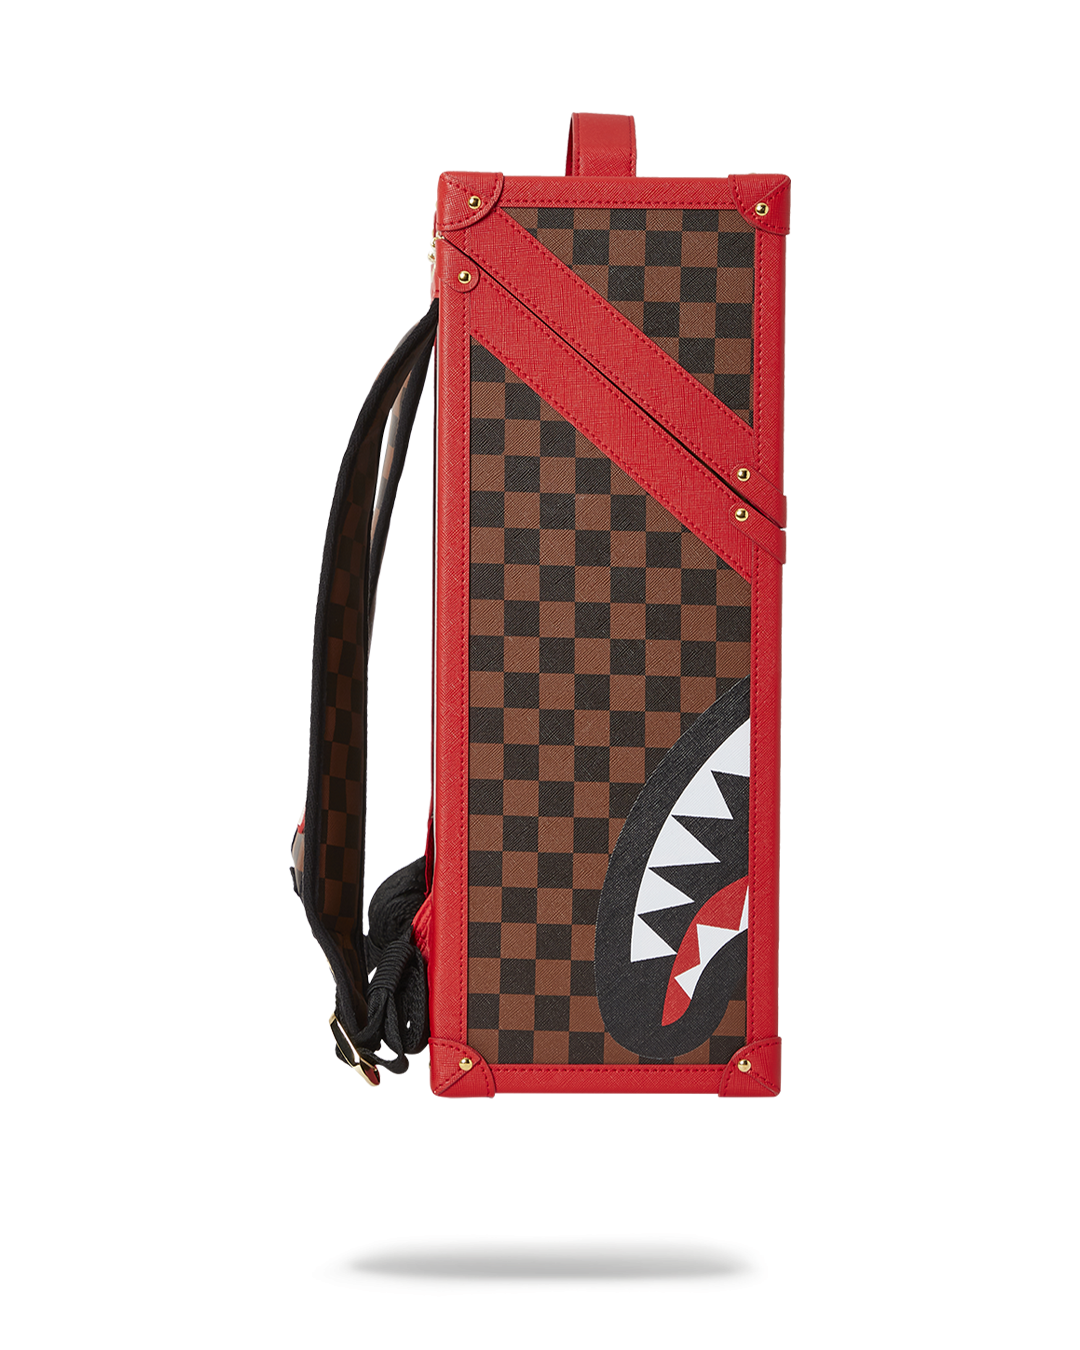 SPRAYGROUND FRENZY SHARKS CHATEAU BACKPACK LIMITED EDITION NEW W/ TAGS  OFFICIAL